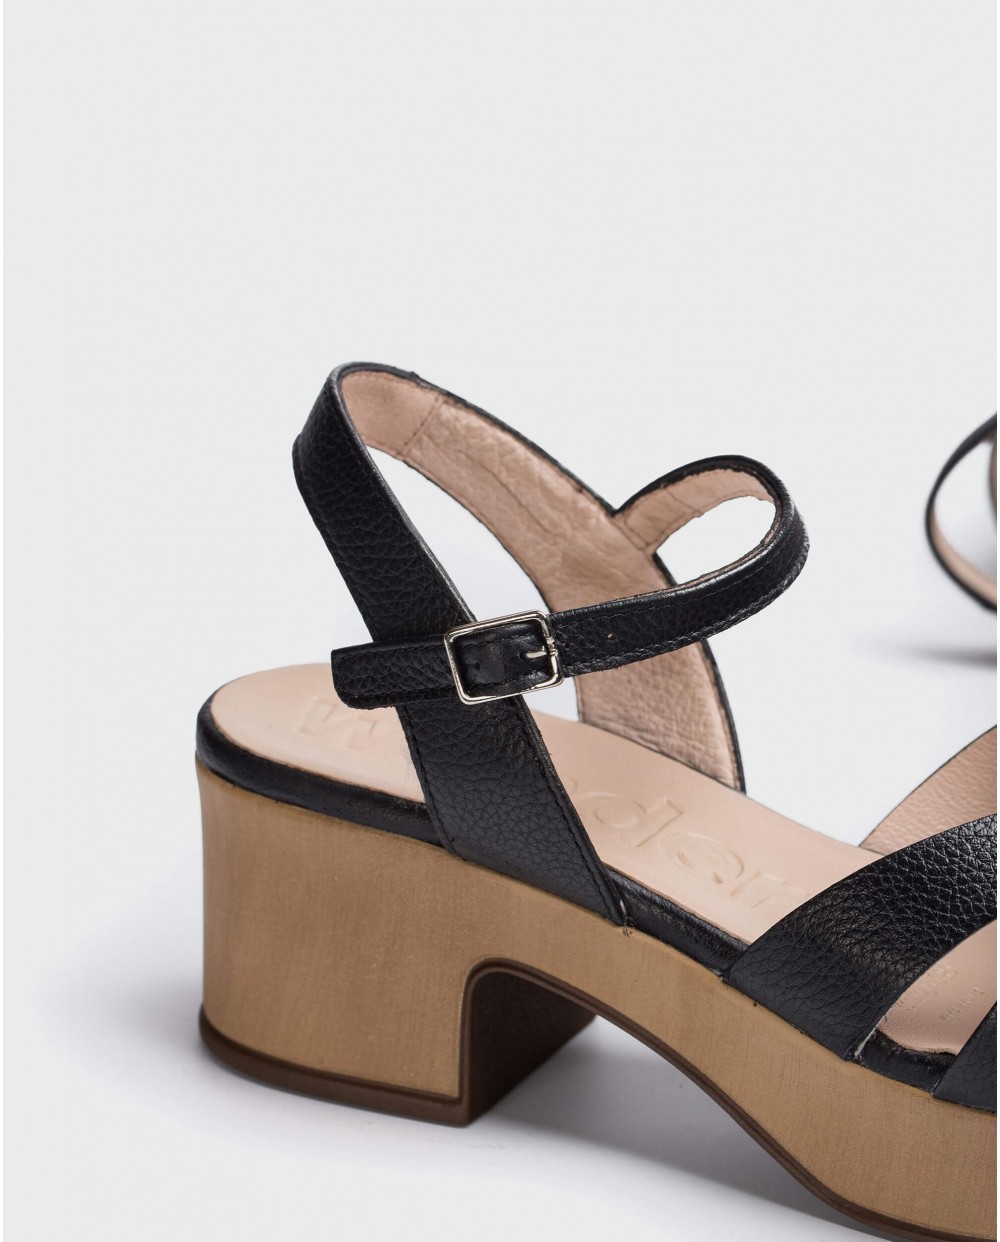 Wonders-Sandals-Wedge sandal with V cut out